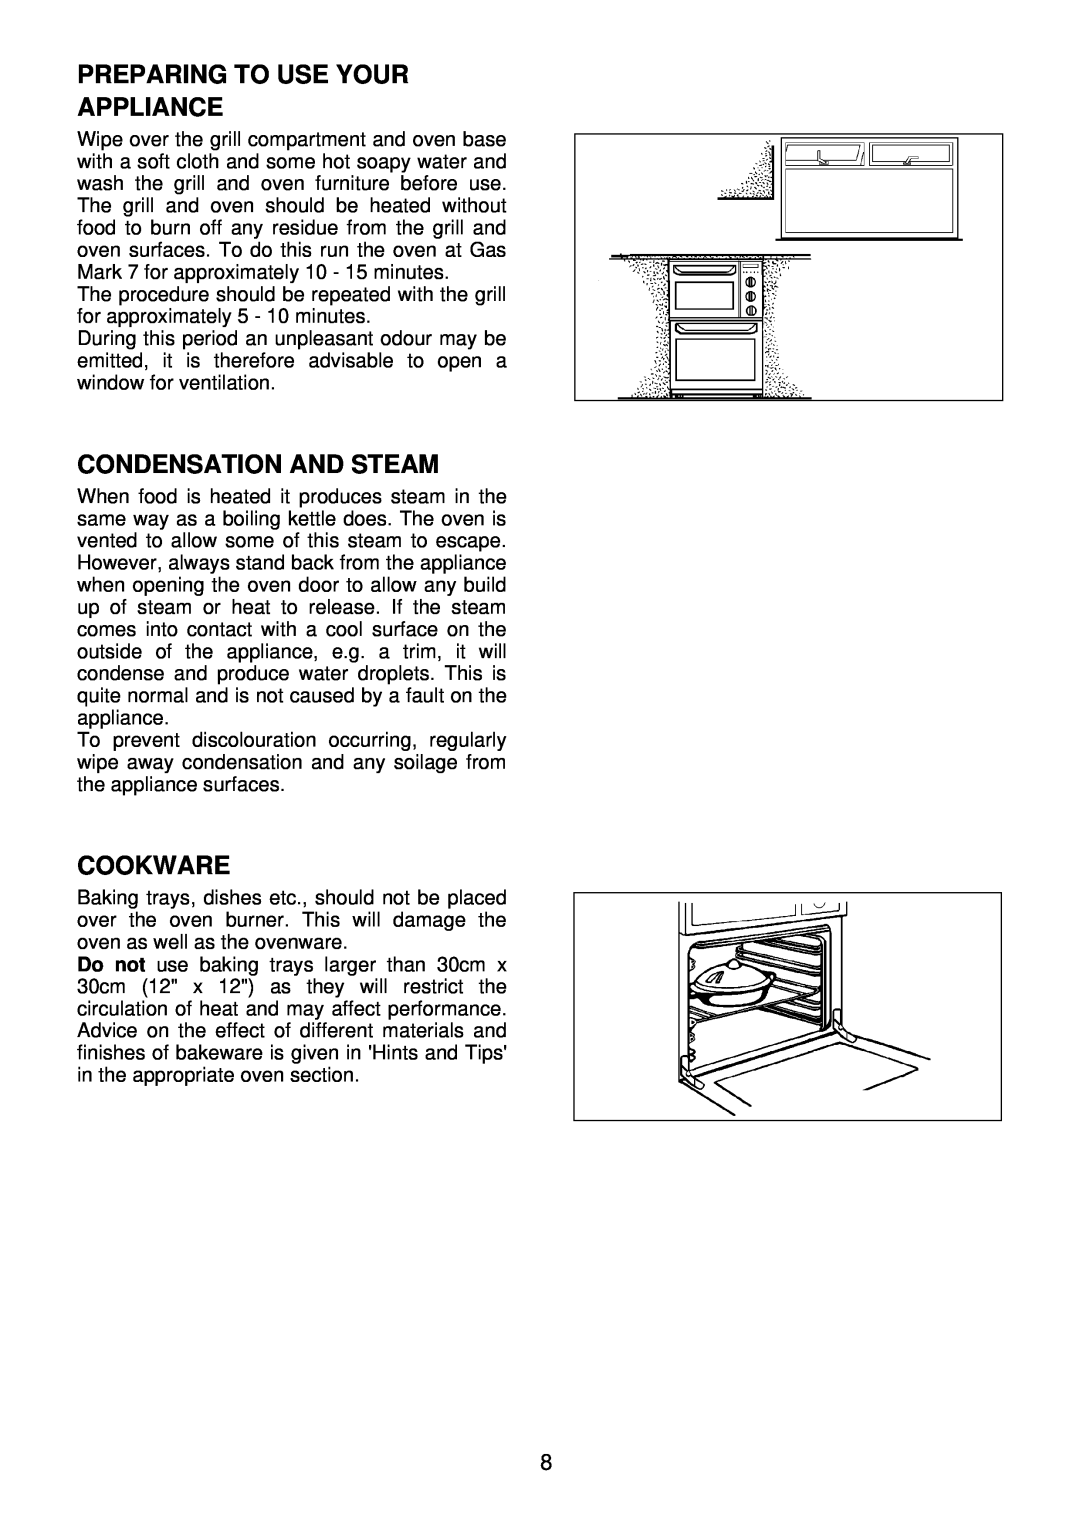 Electrolux EDB 872 manual Preparing To Use Your Appliance, Condensation And Steam, Cookware 